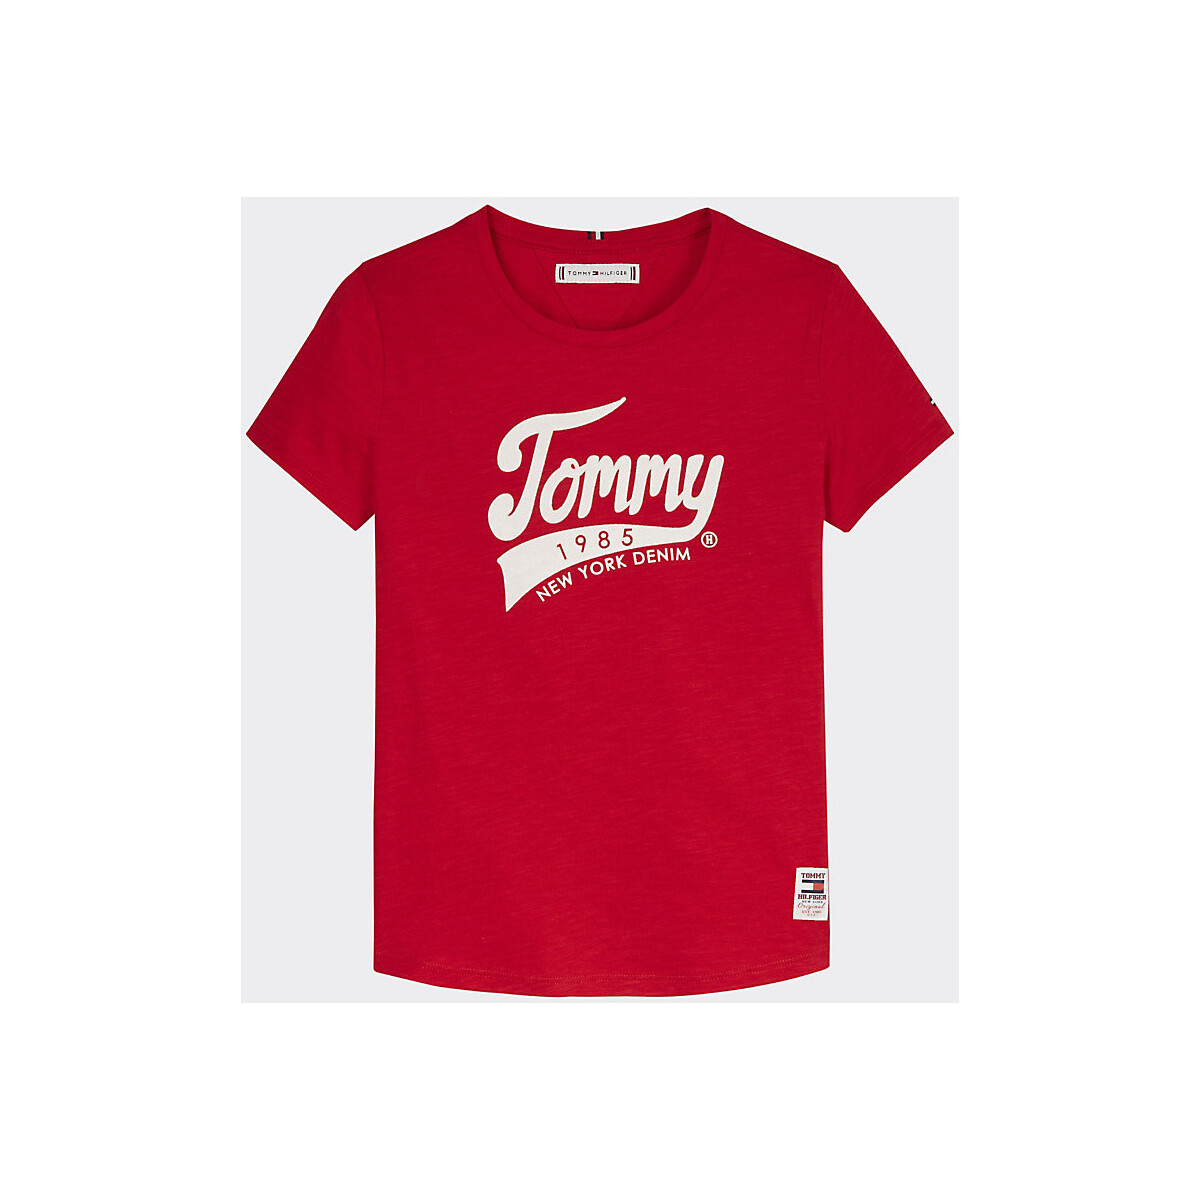 Vêtements Fille T-shirts & Polos Tommy Hilfiger KG0KG04960 1985 TEE-XA9 RACING RED Rouge